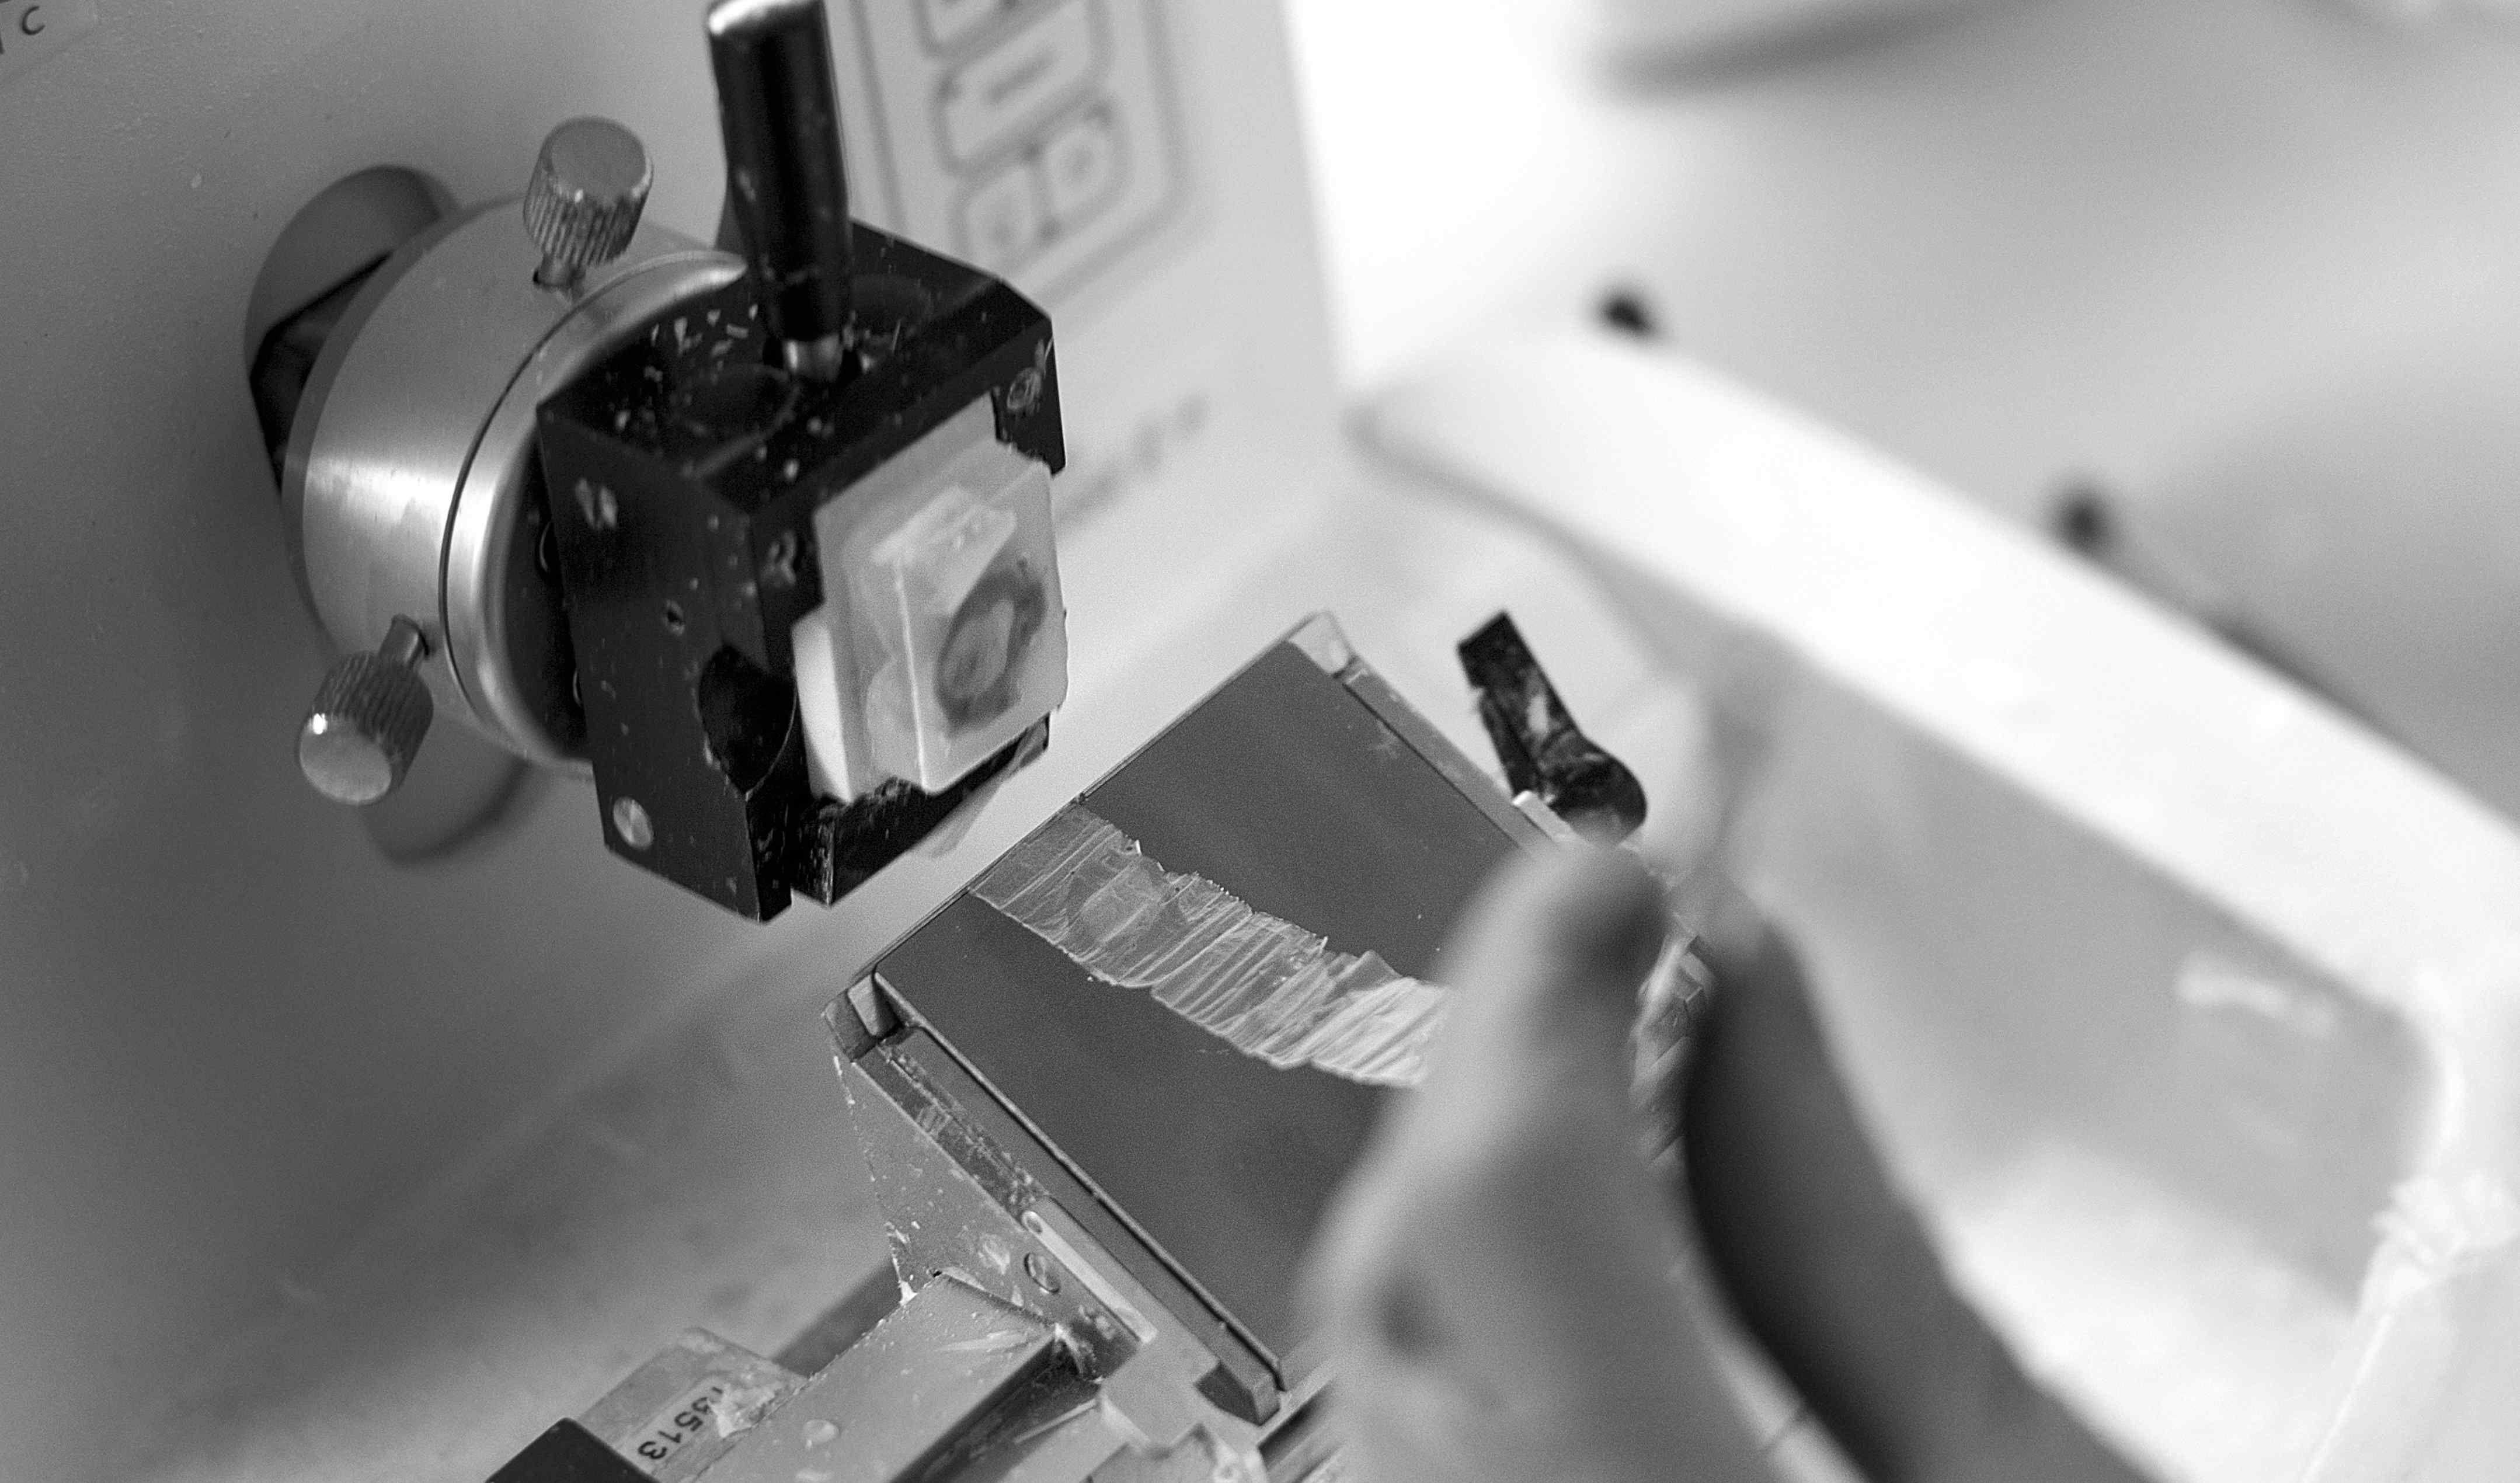 A microtome is used to cut very thin slices of brain tissue.